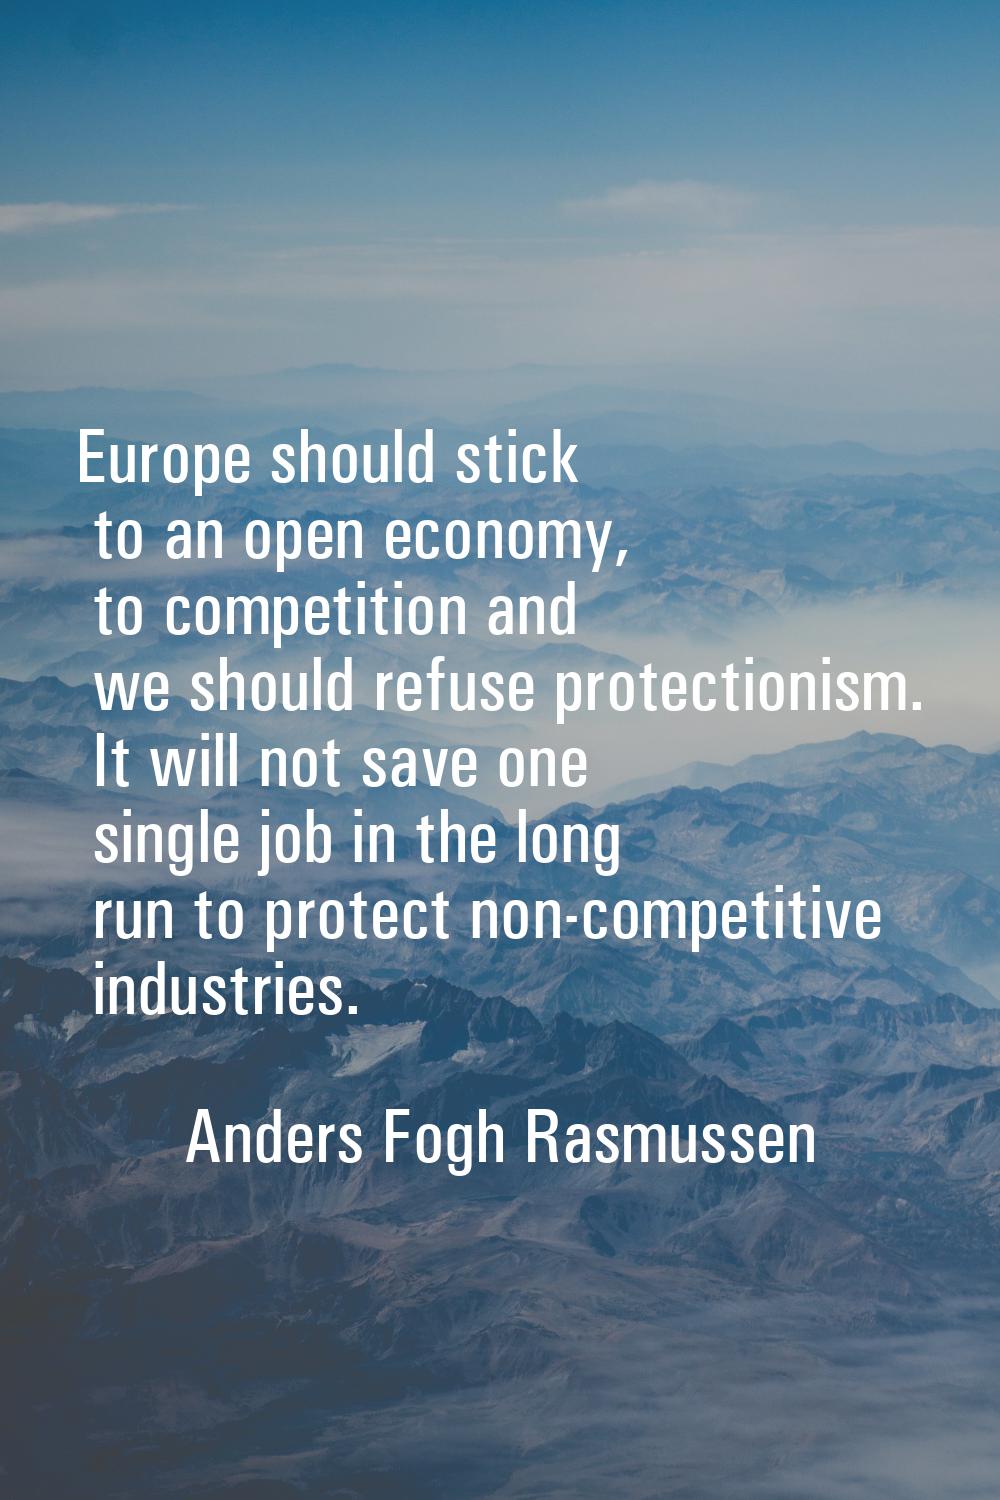 Europe should stick to an open economy, to competition and we should refuse protectionism. It will 